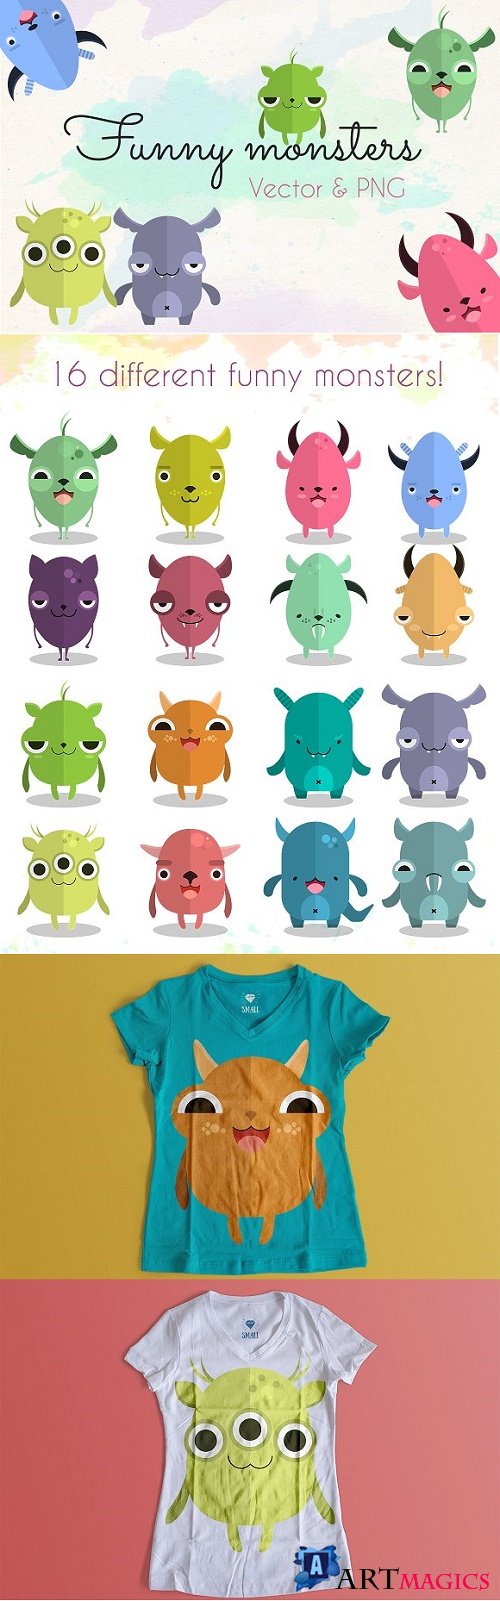 Funny monsters collection - 536219